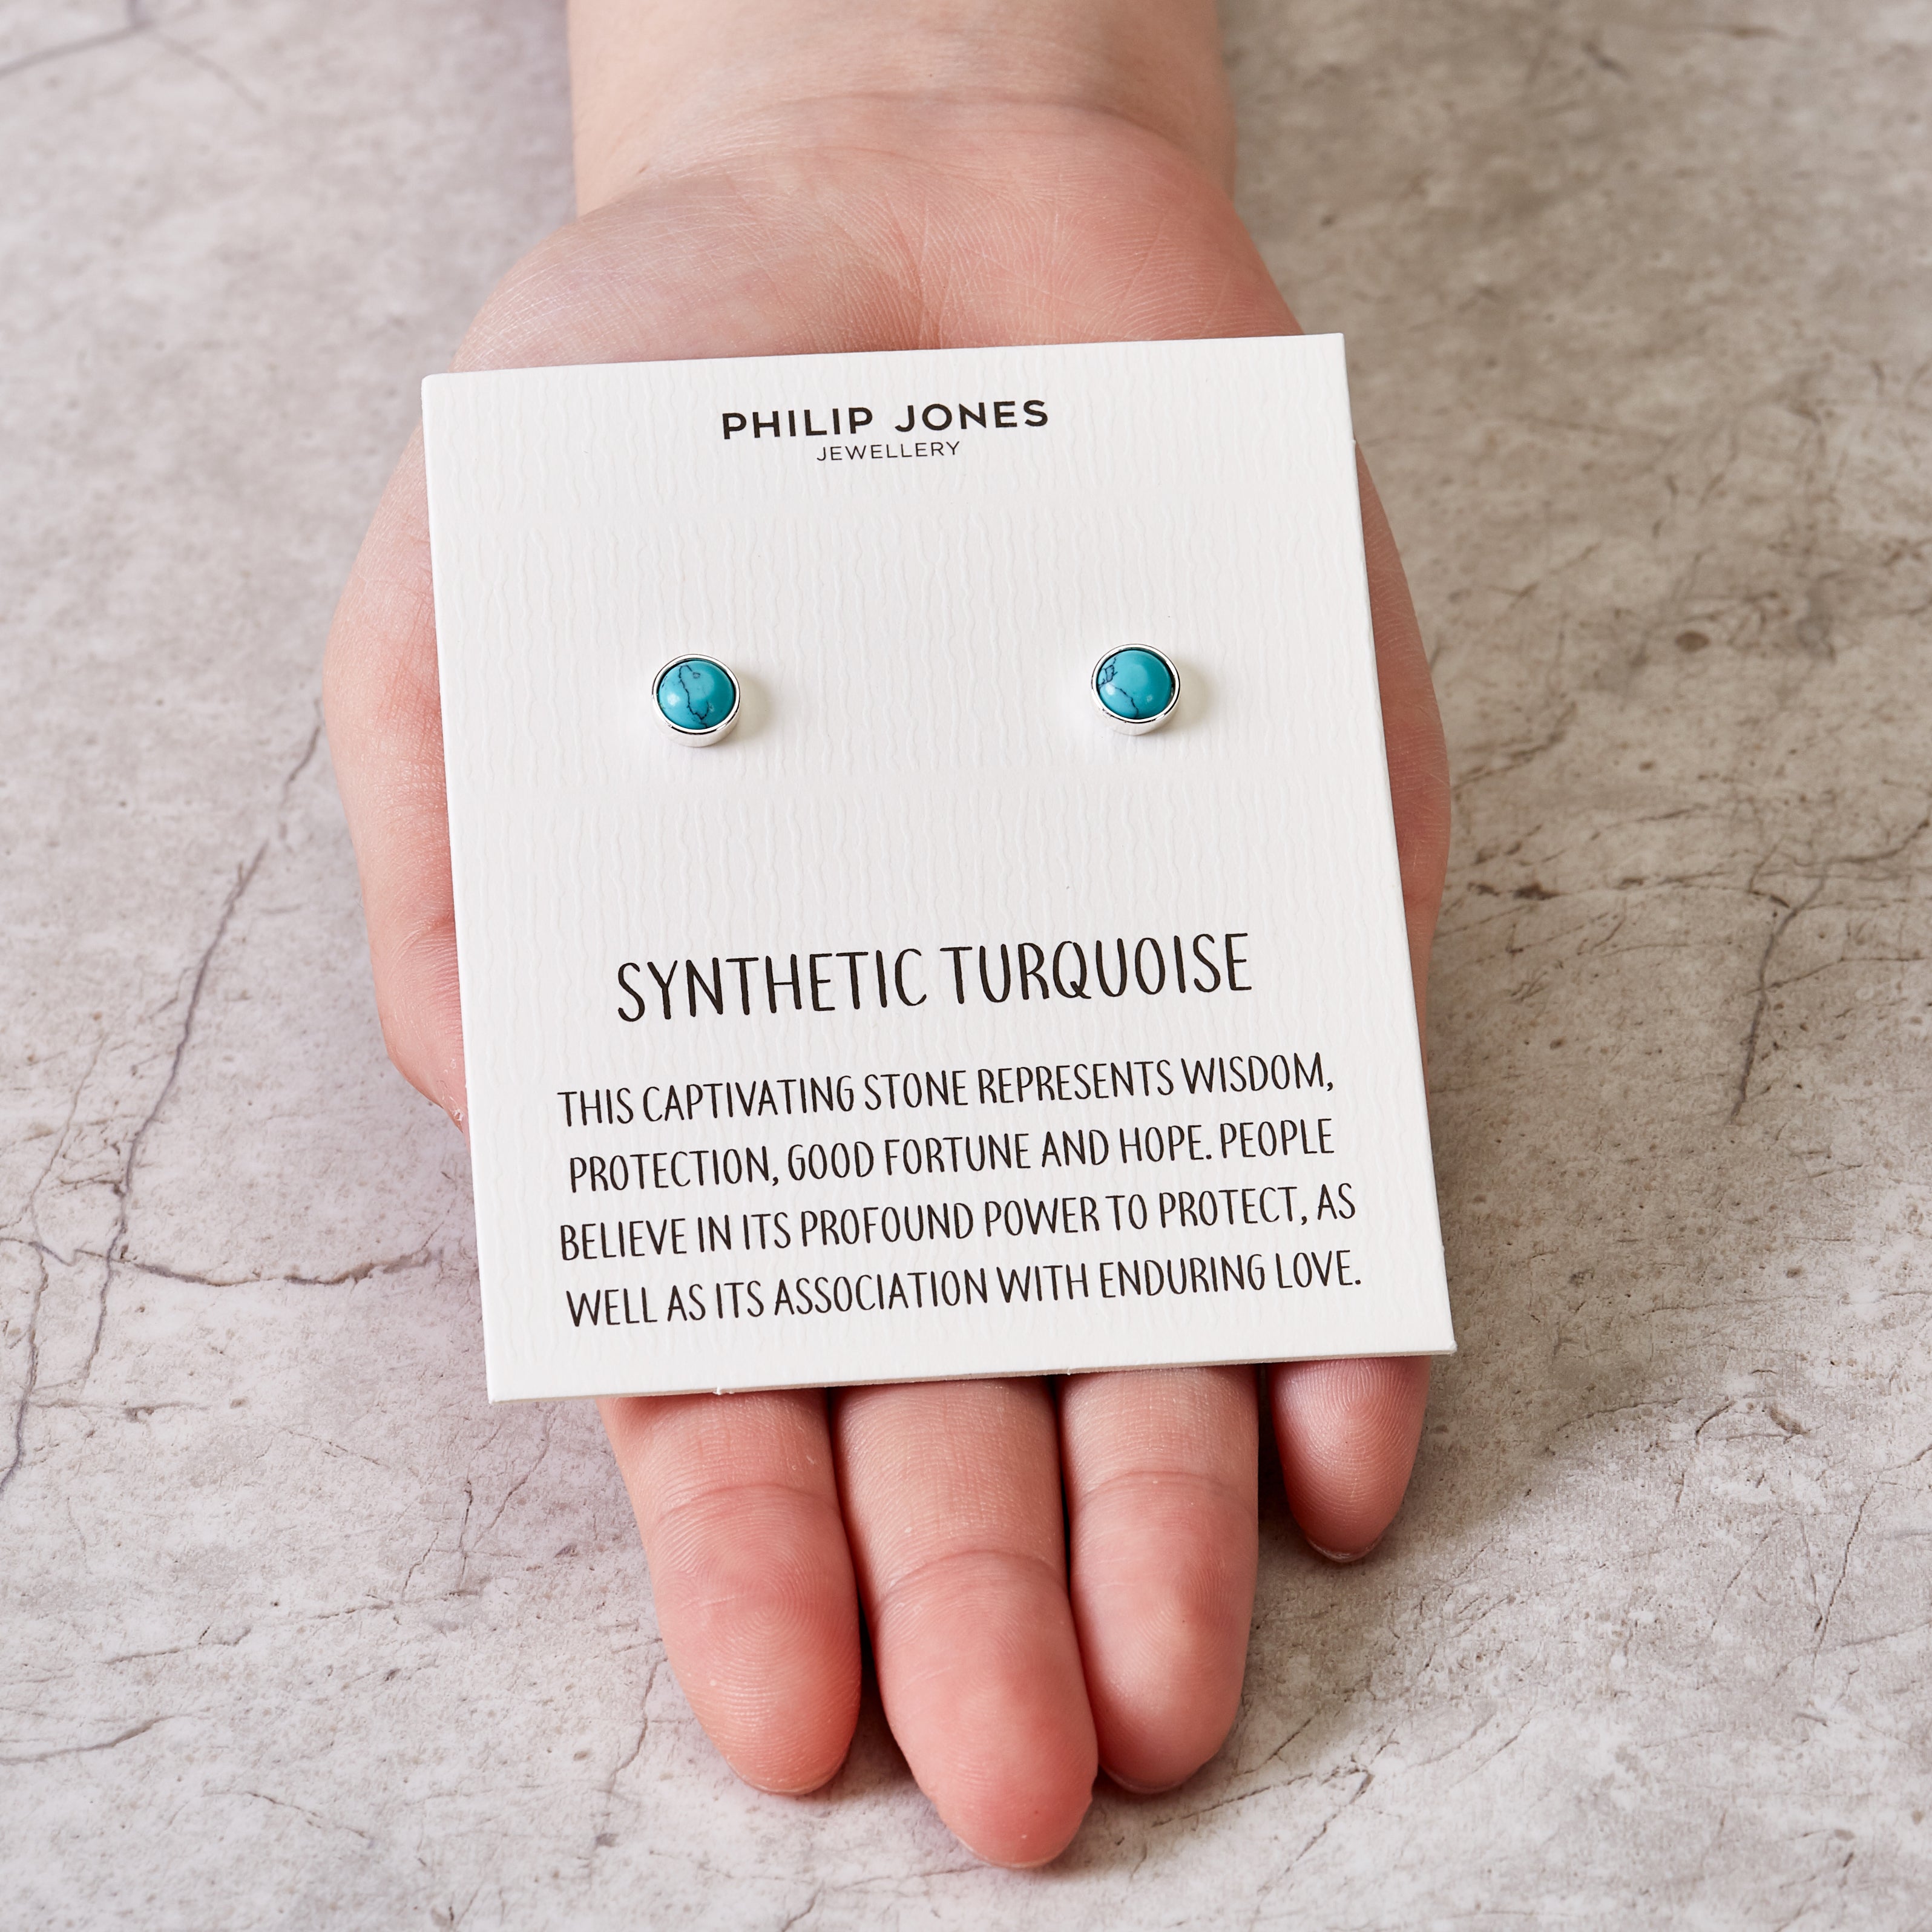 Synthetic Turquoise Stud Earrings with Quote Card